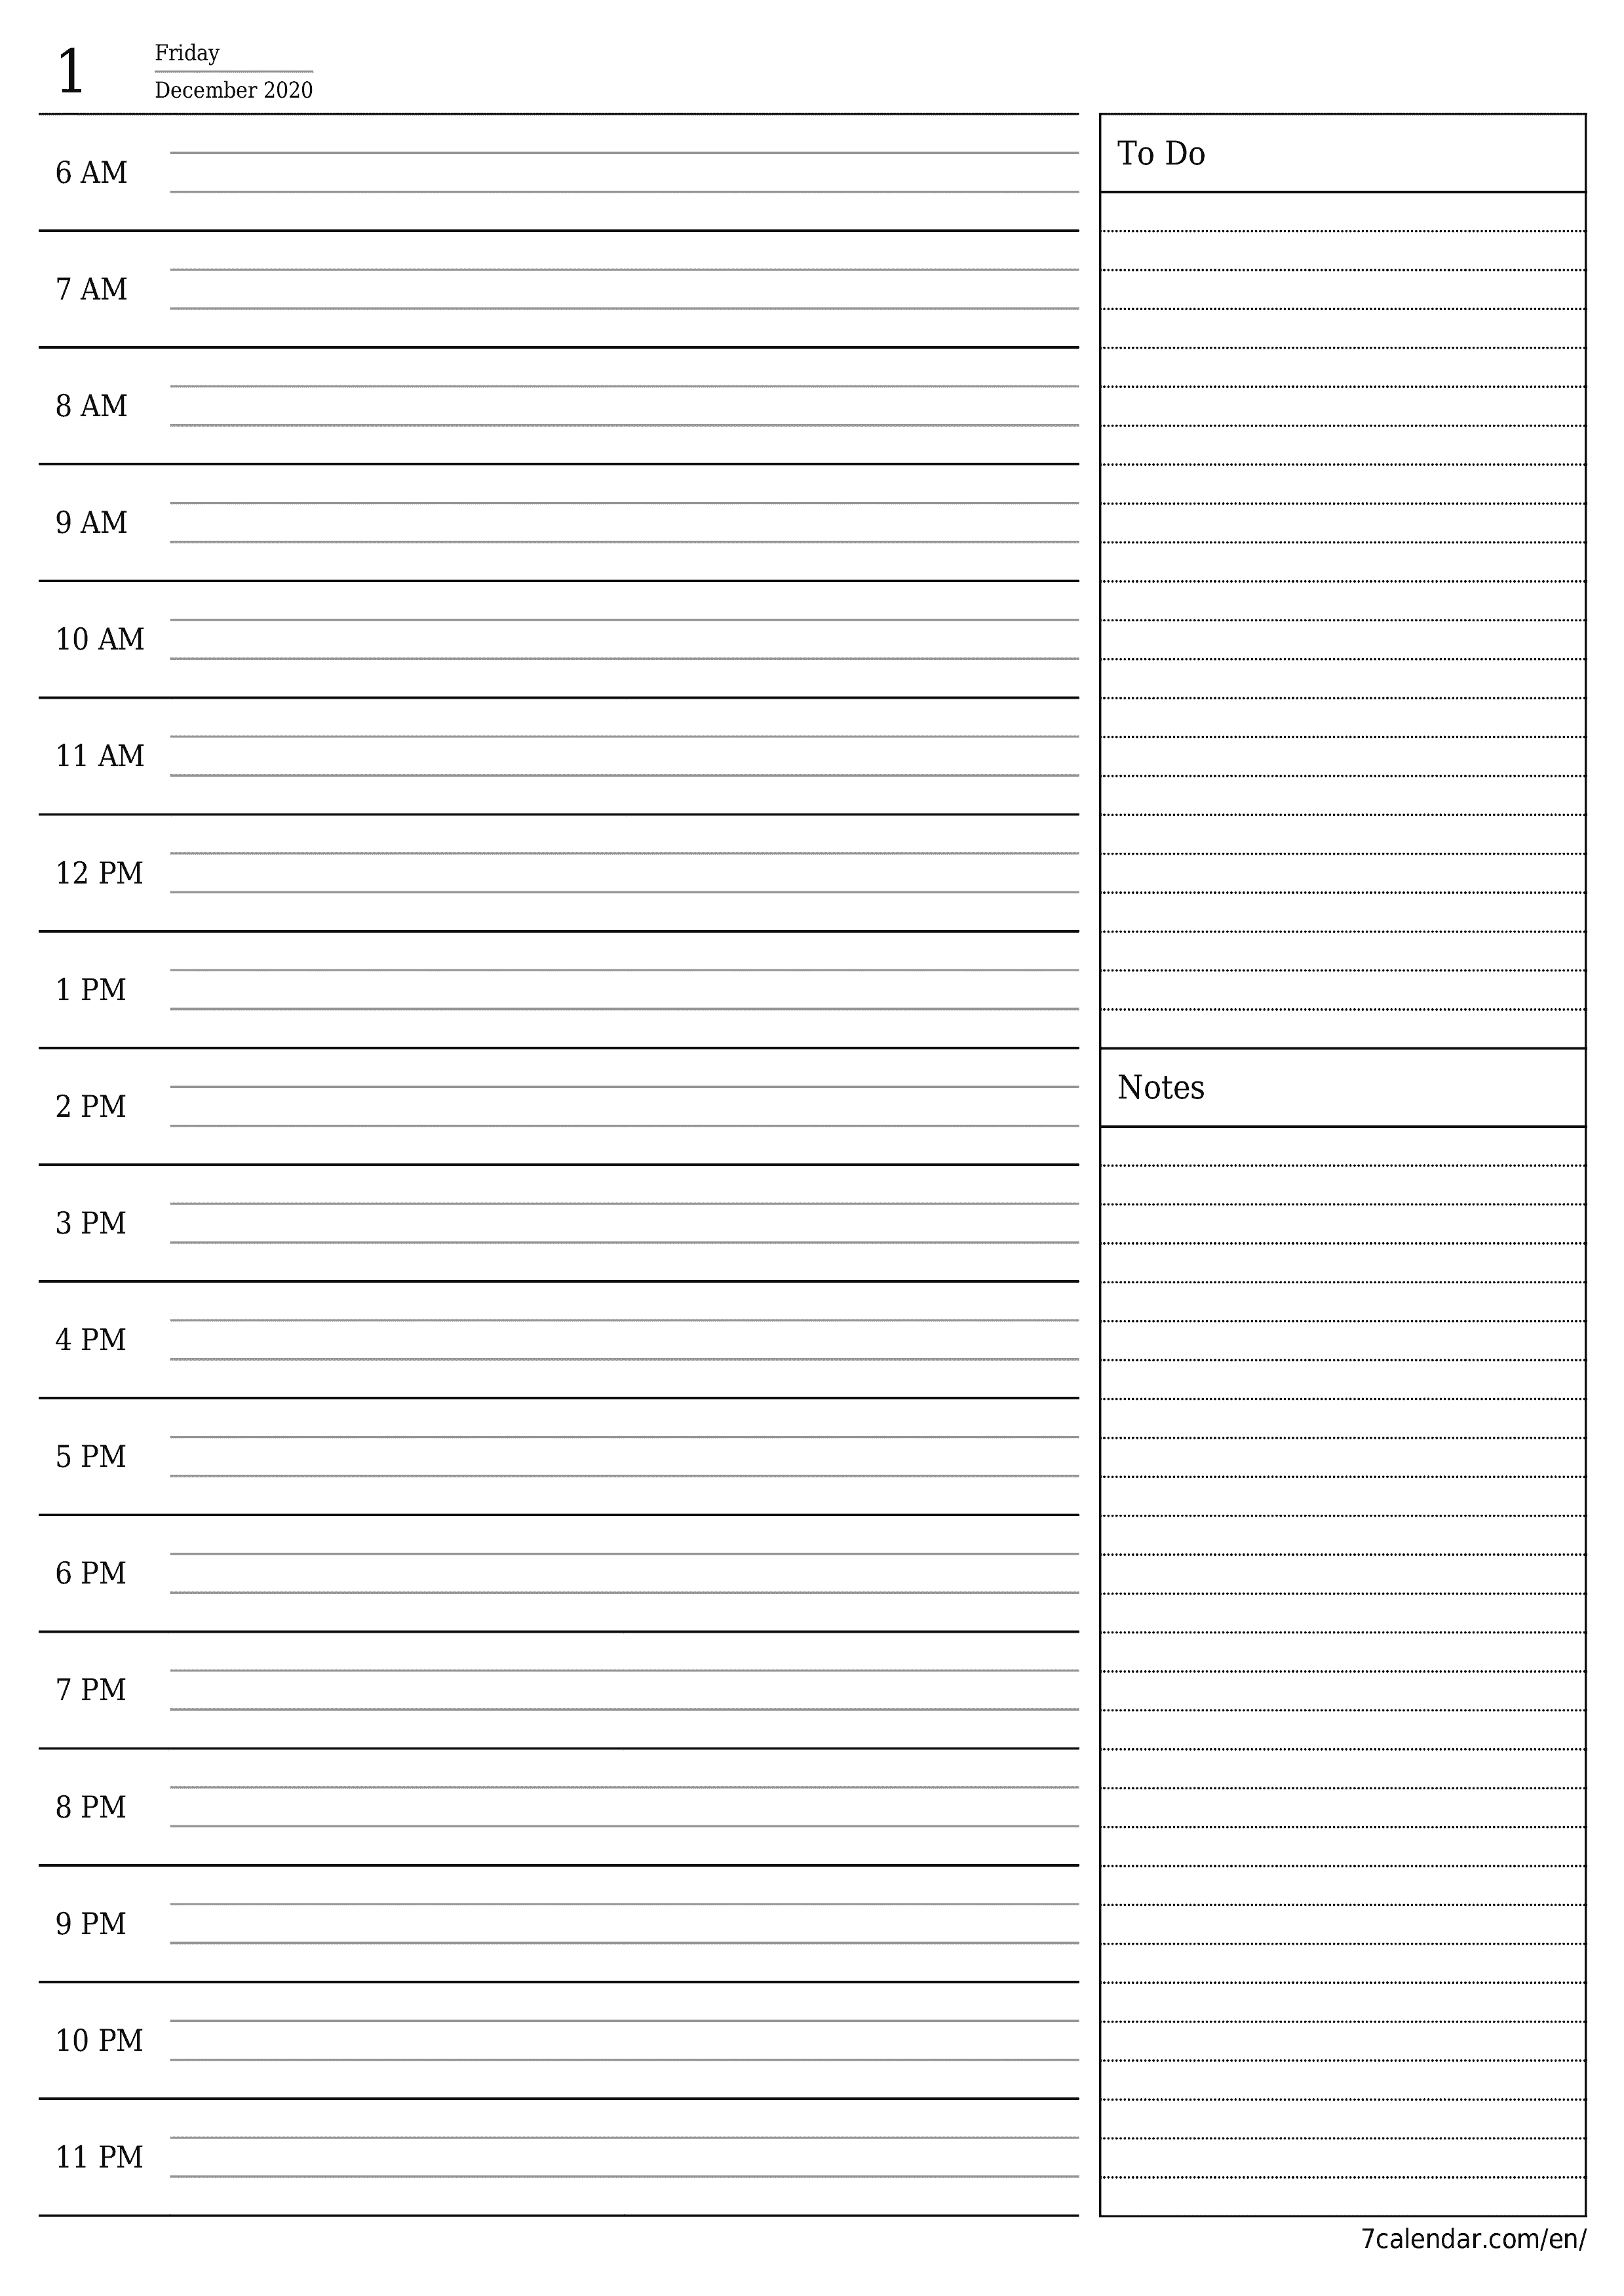 Blank daily printable calendar and planner for day December 2020 with notes, save and print to PDF PNG English